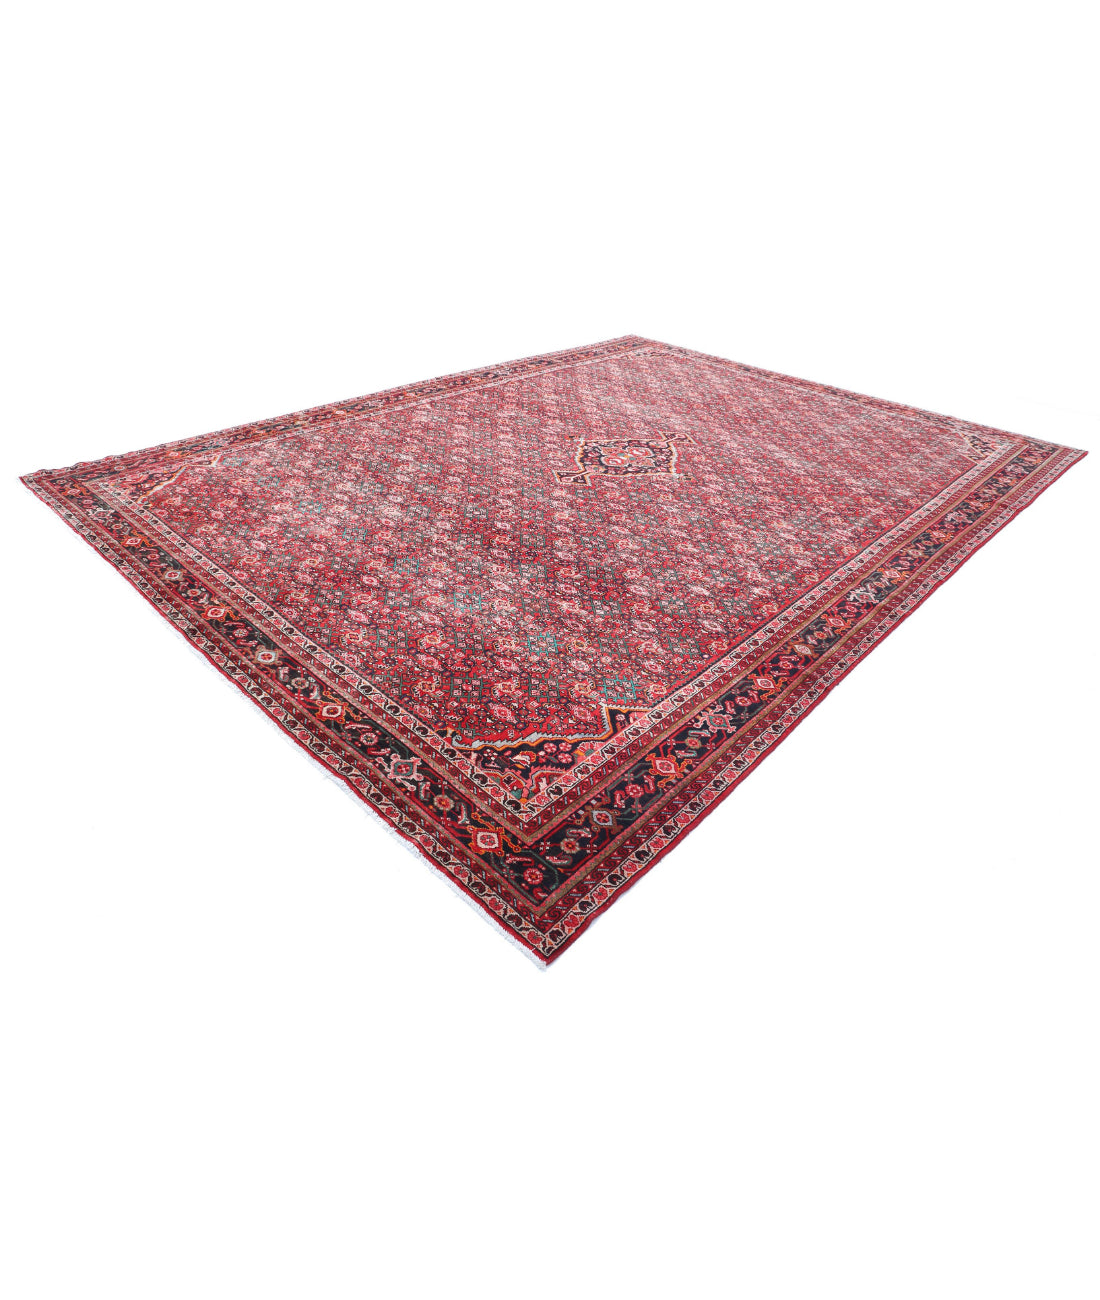 Hand Knotted Persian Hamadan Wool Rug - 11'1'' x 14'10'' 11'1'' x 14'10'' (333 X 445) / Red / Black